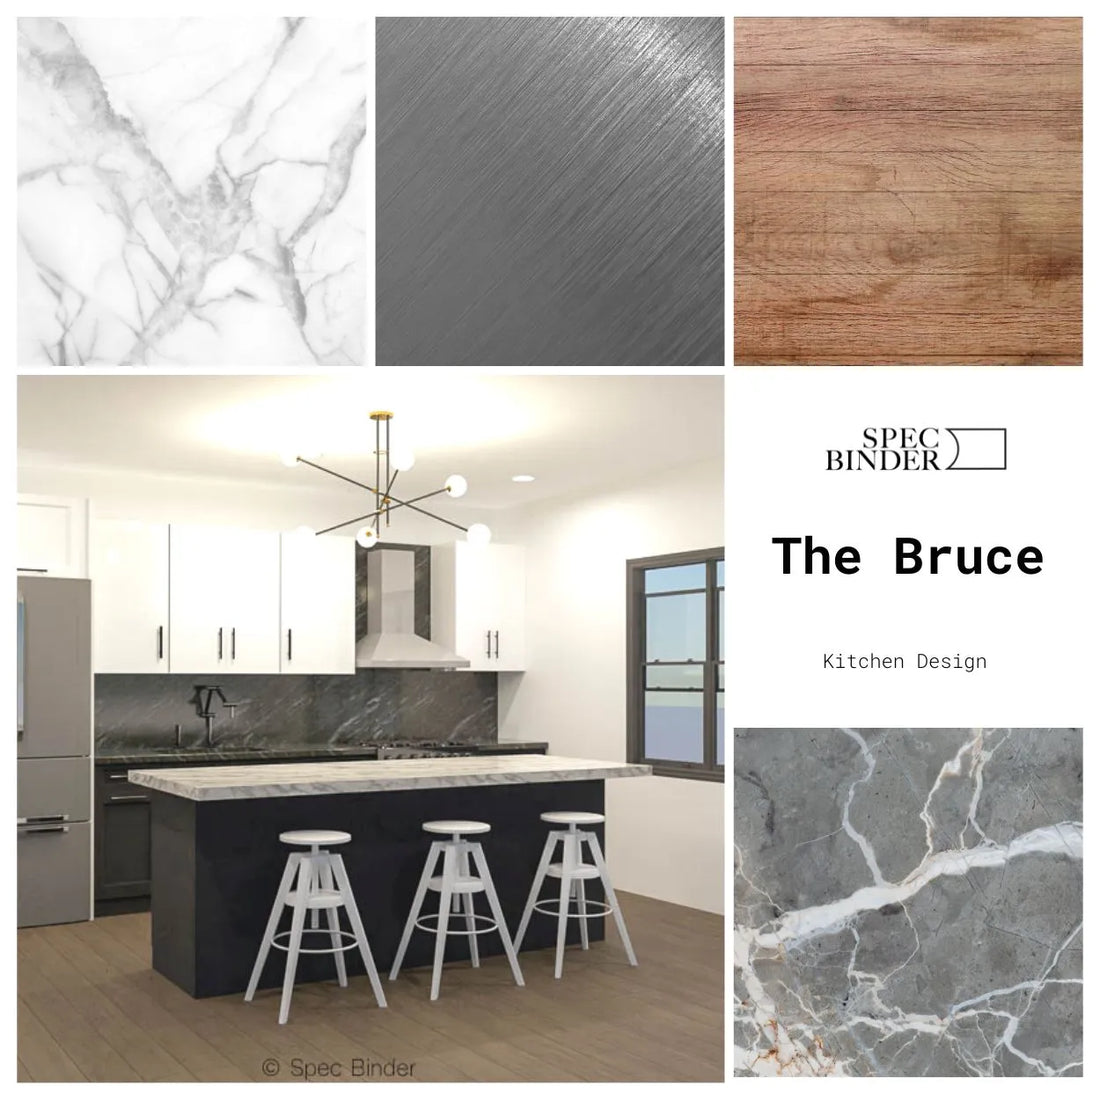 3d renderings, materials, and color selections for The Bruce kitchen design